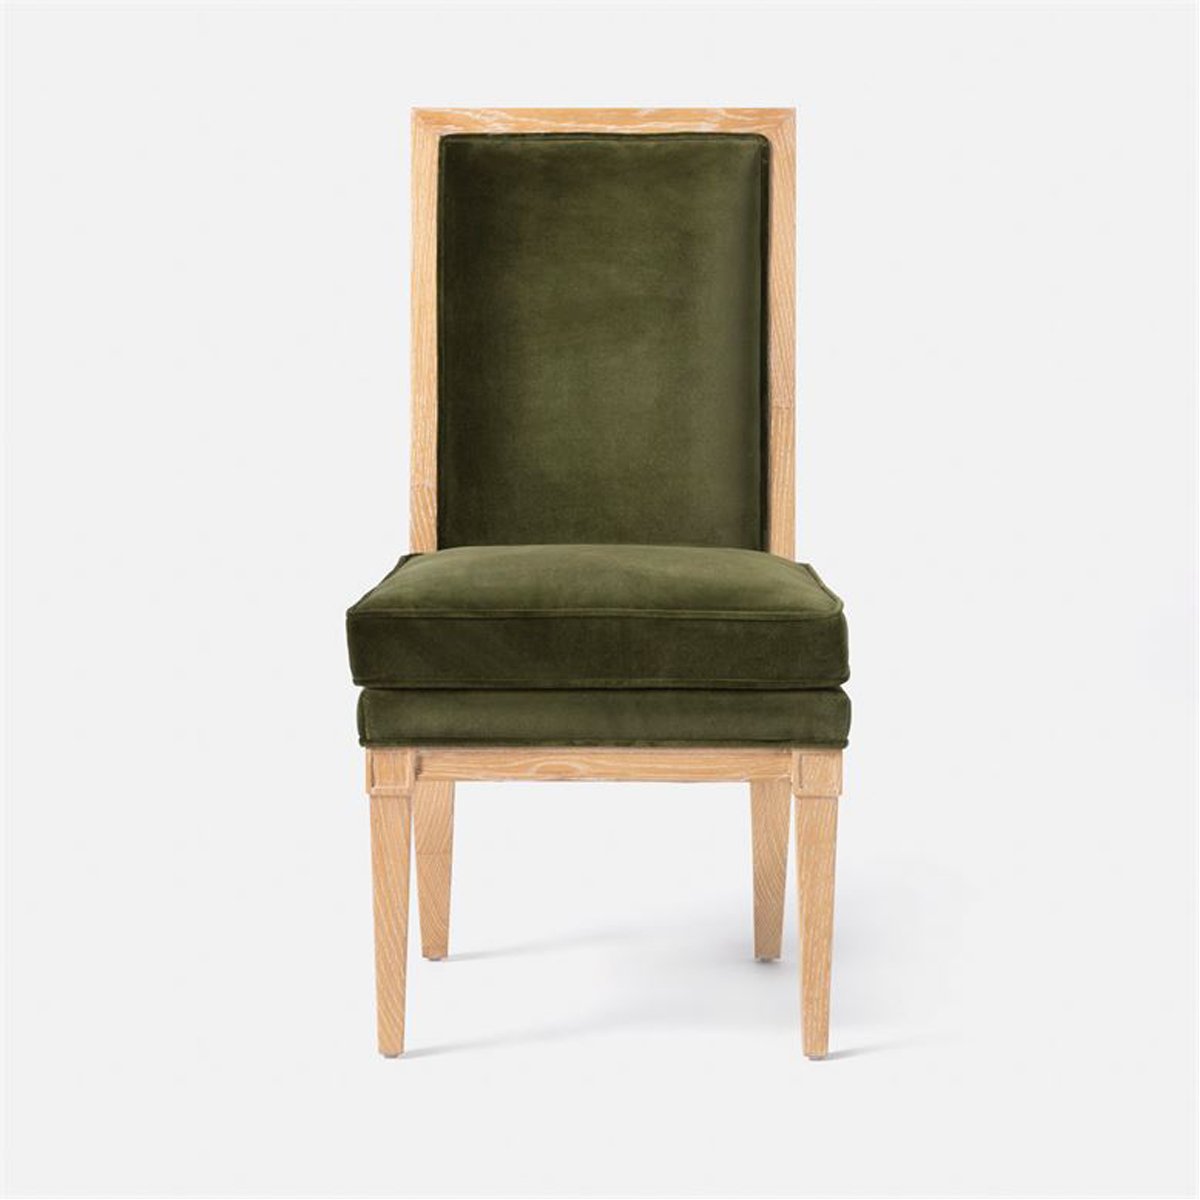 Made Goods Evan Dining Chair in Weser High-Performance Fabric